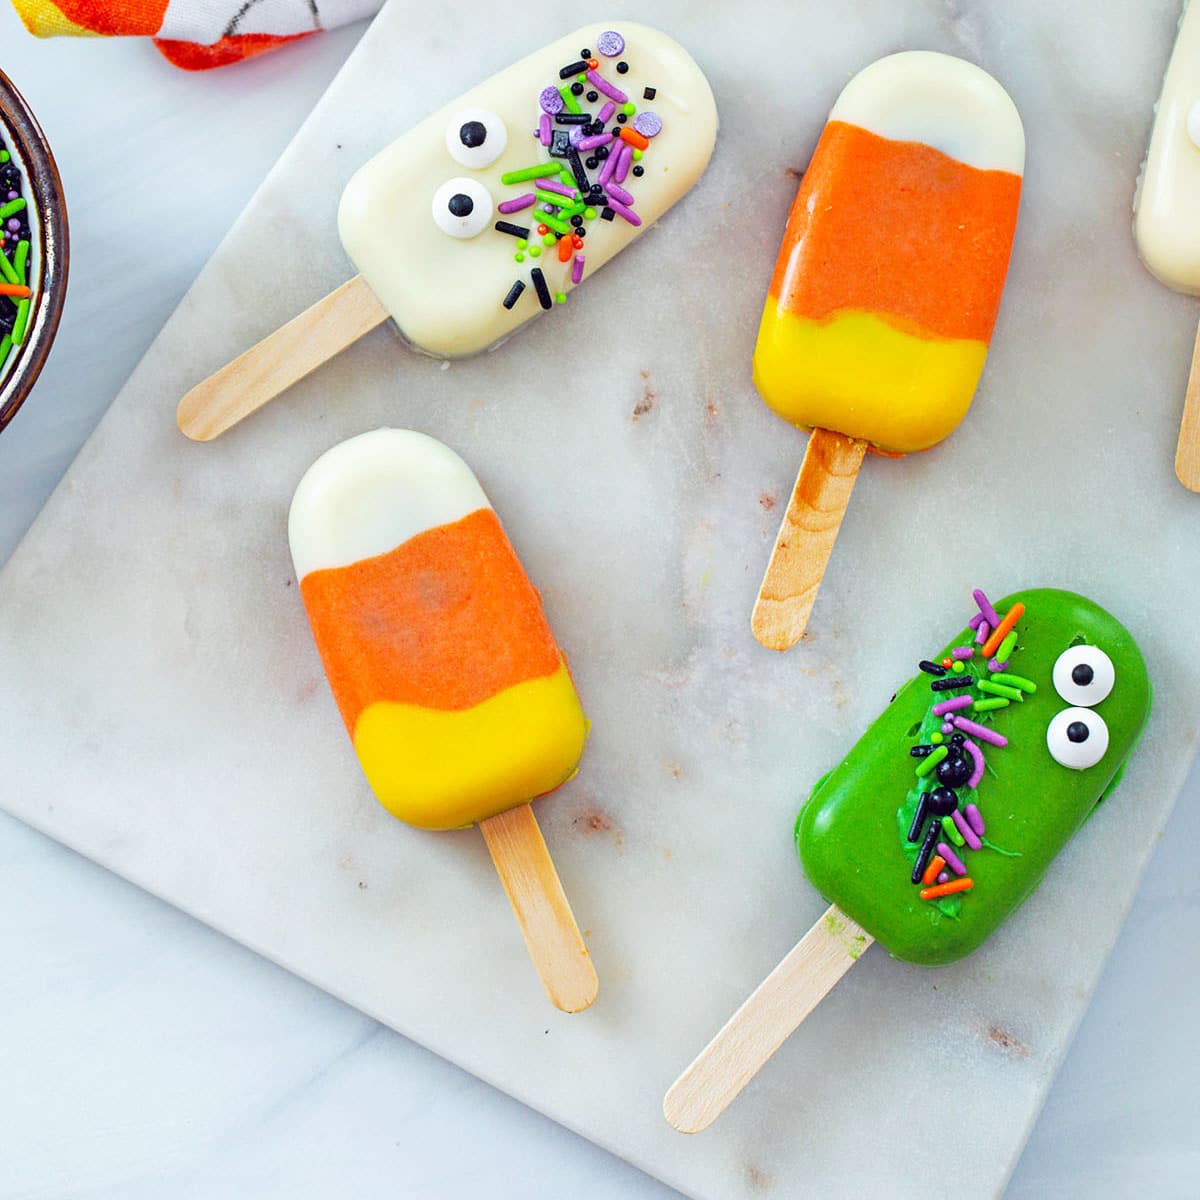 Overhead closeup view of various Halloween Cakesicles on marble board, including candy corn cakesicles and ghost cakesicle